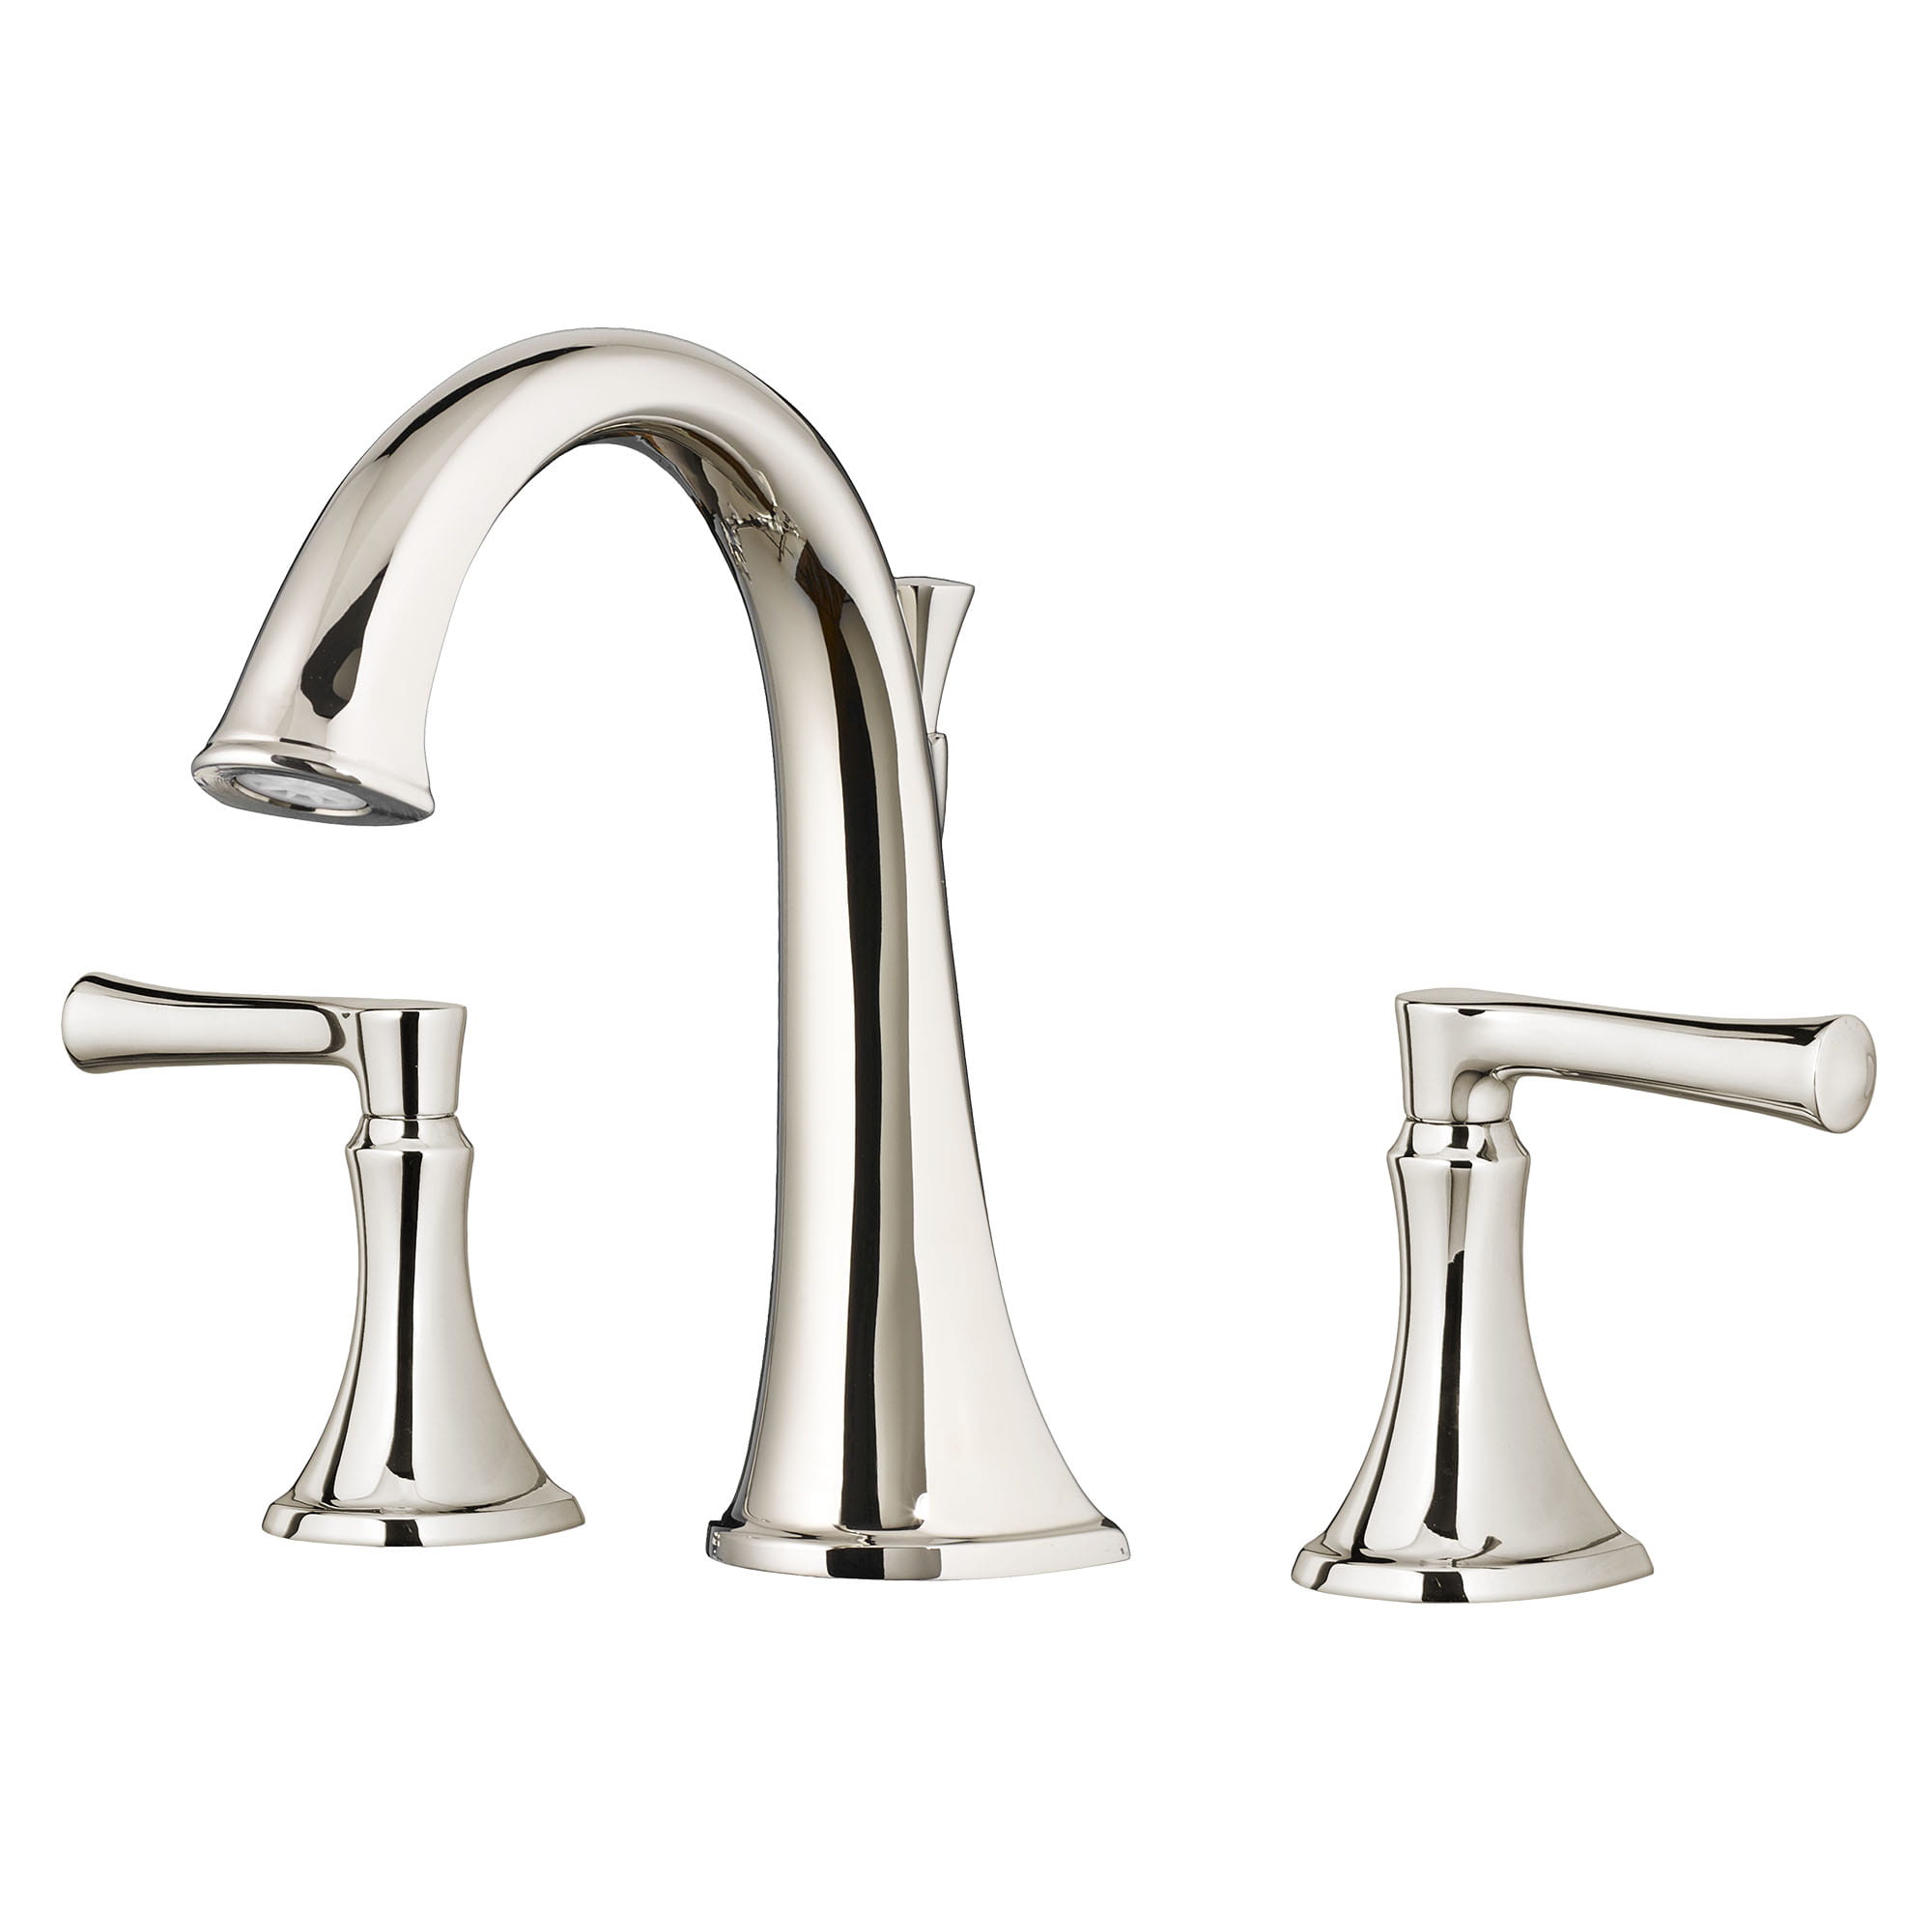 Estate Bathtub Faucet for Flash Rough in Valve with Lever Handles POLISHED  NICKEL